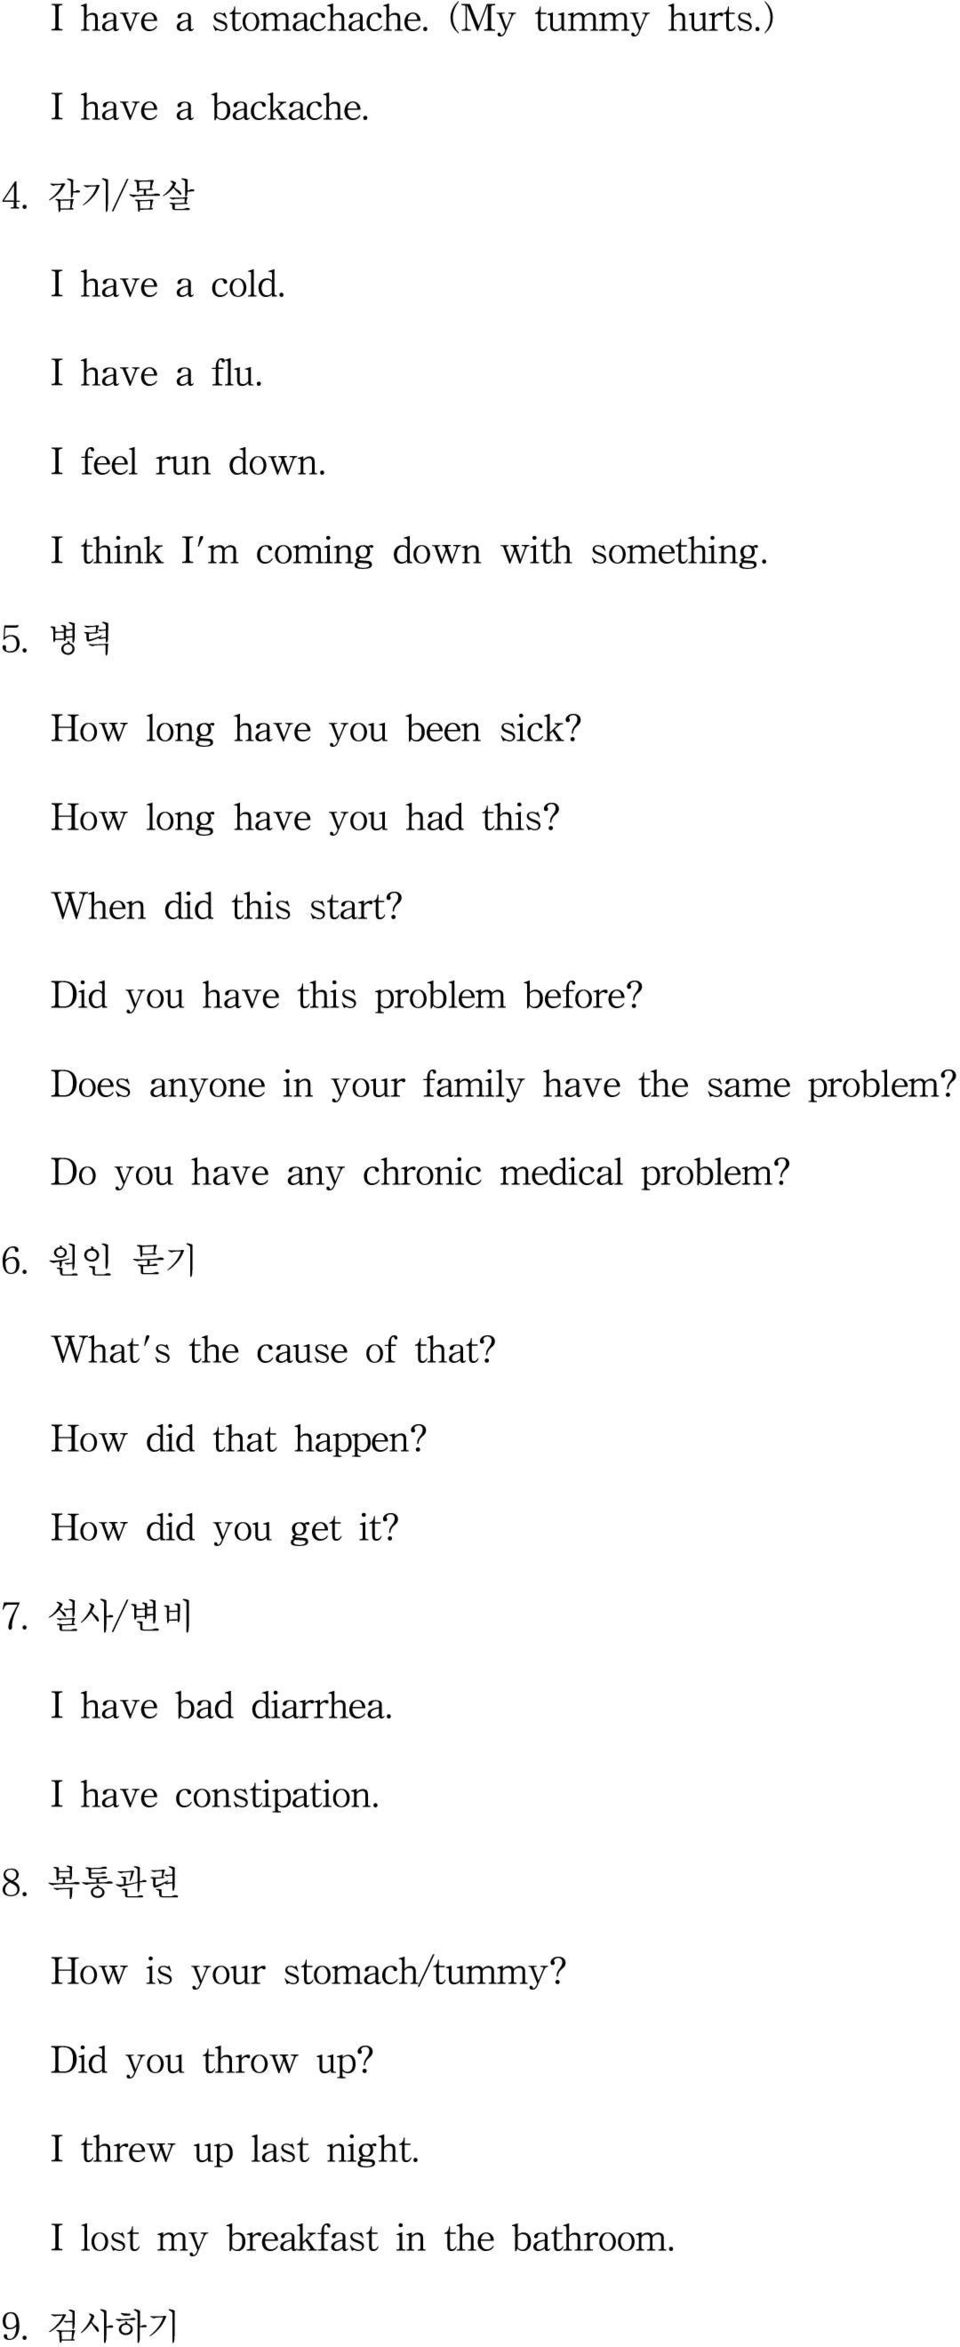 Does anyone in your family have the same problem? Do you have any chronic medical problem? 6. 원인 묻기 What's the cause of that? How did that happen?